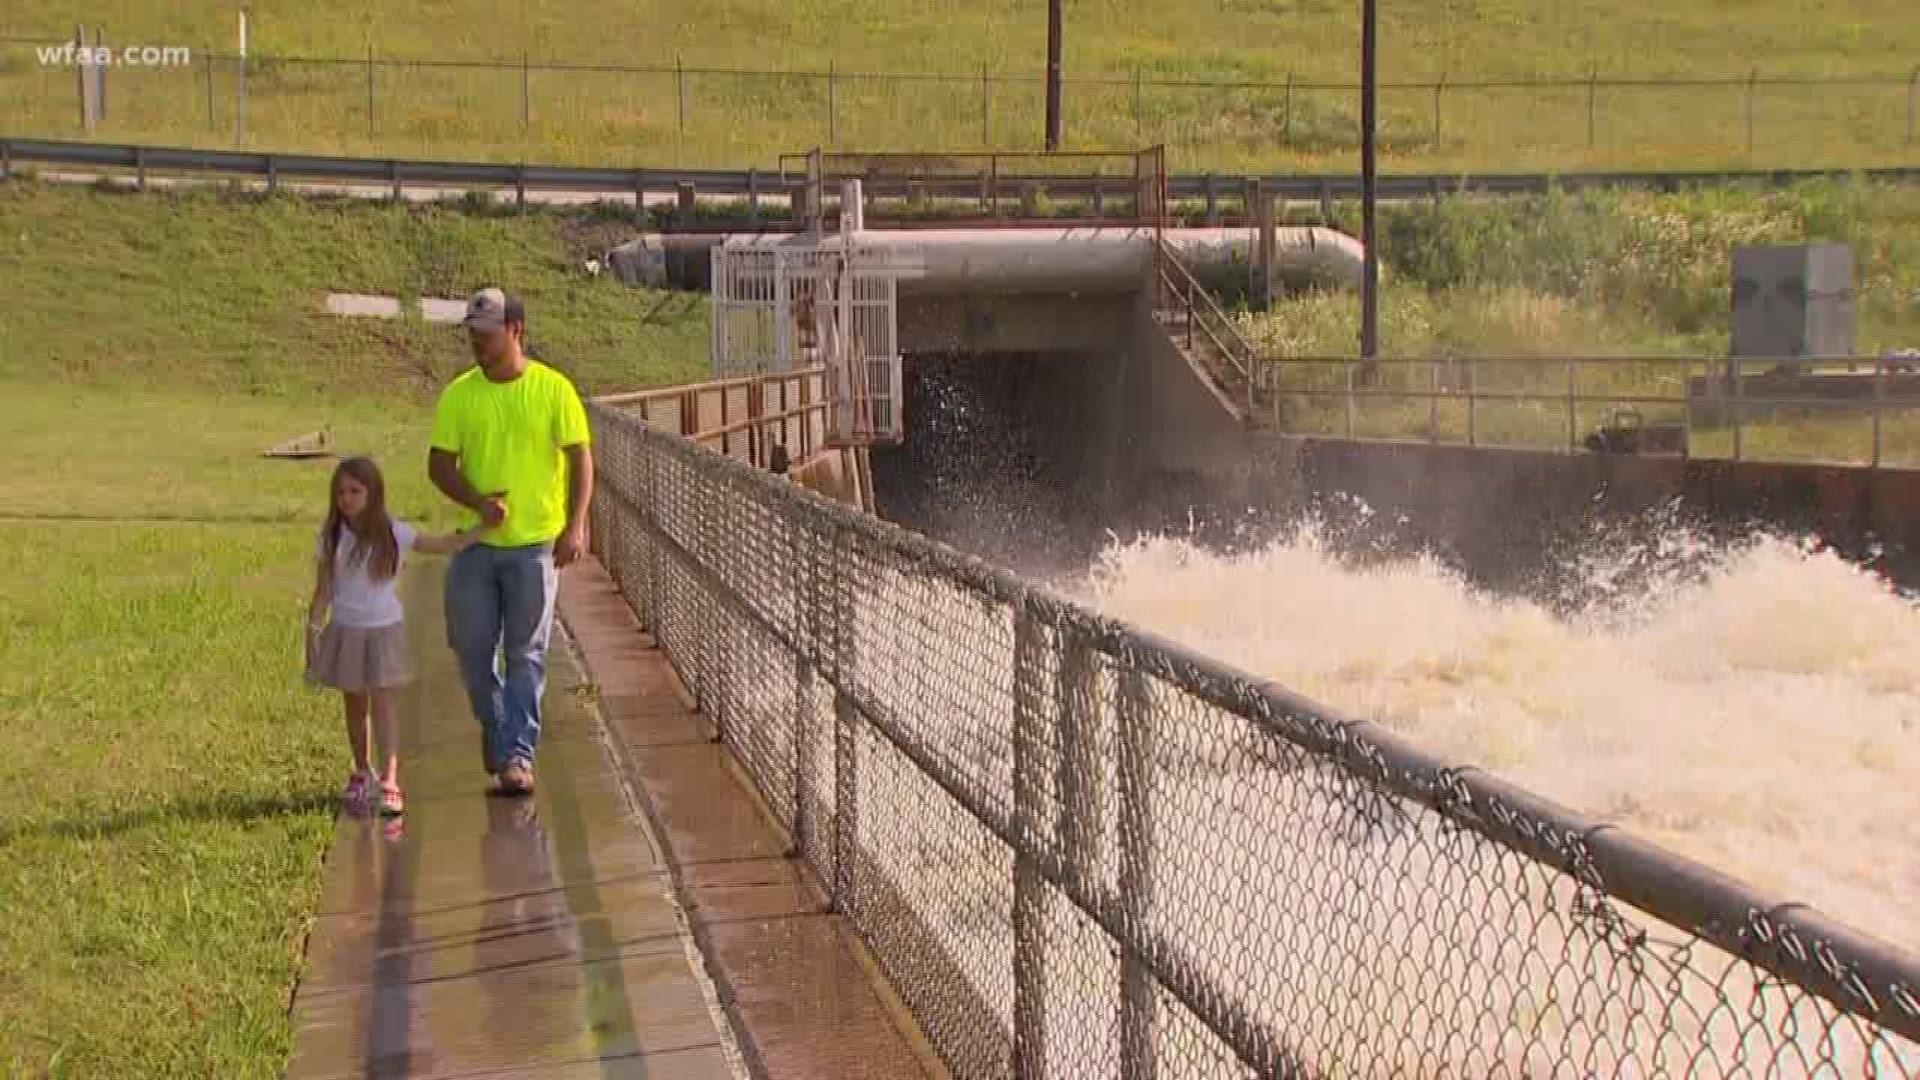 Flood control measures underway at area U.S. Army Corps of Engineers lakes